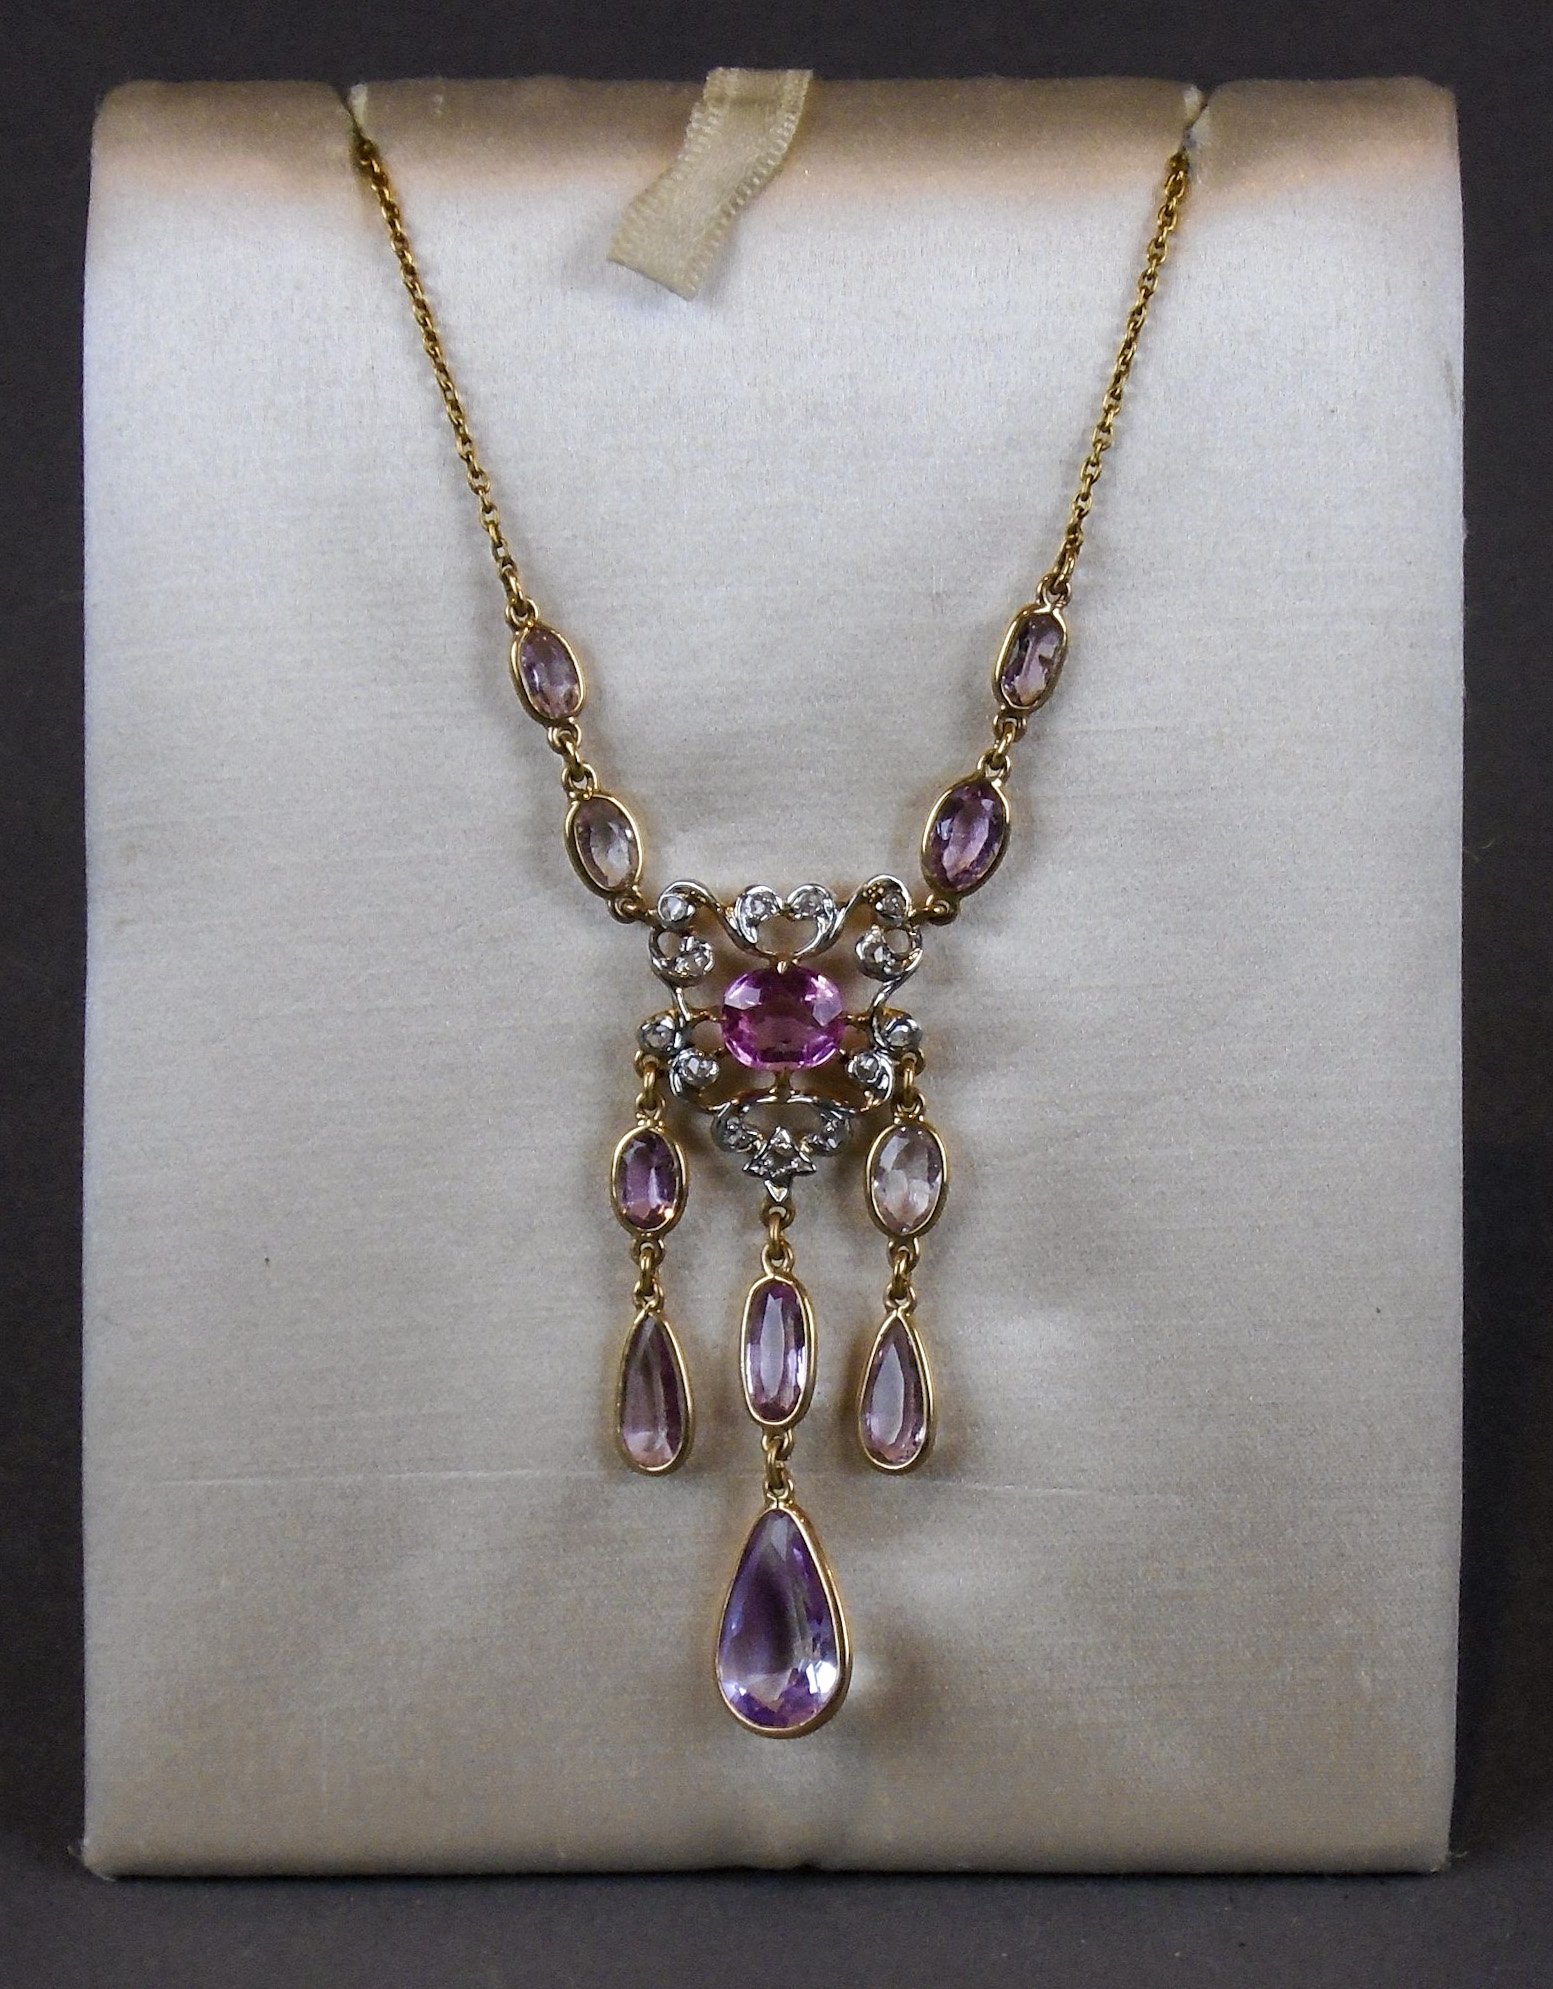 Jeweled necklace in the Locust Grove collection worn by Annette Young